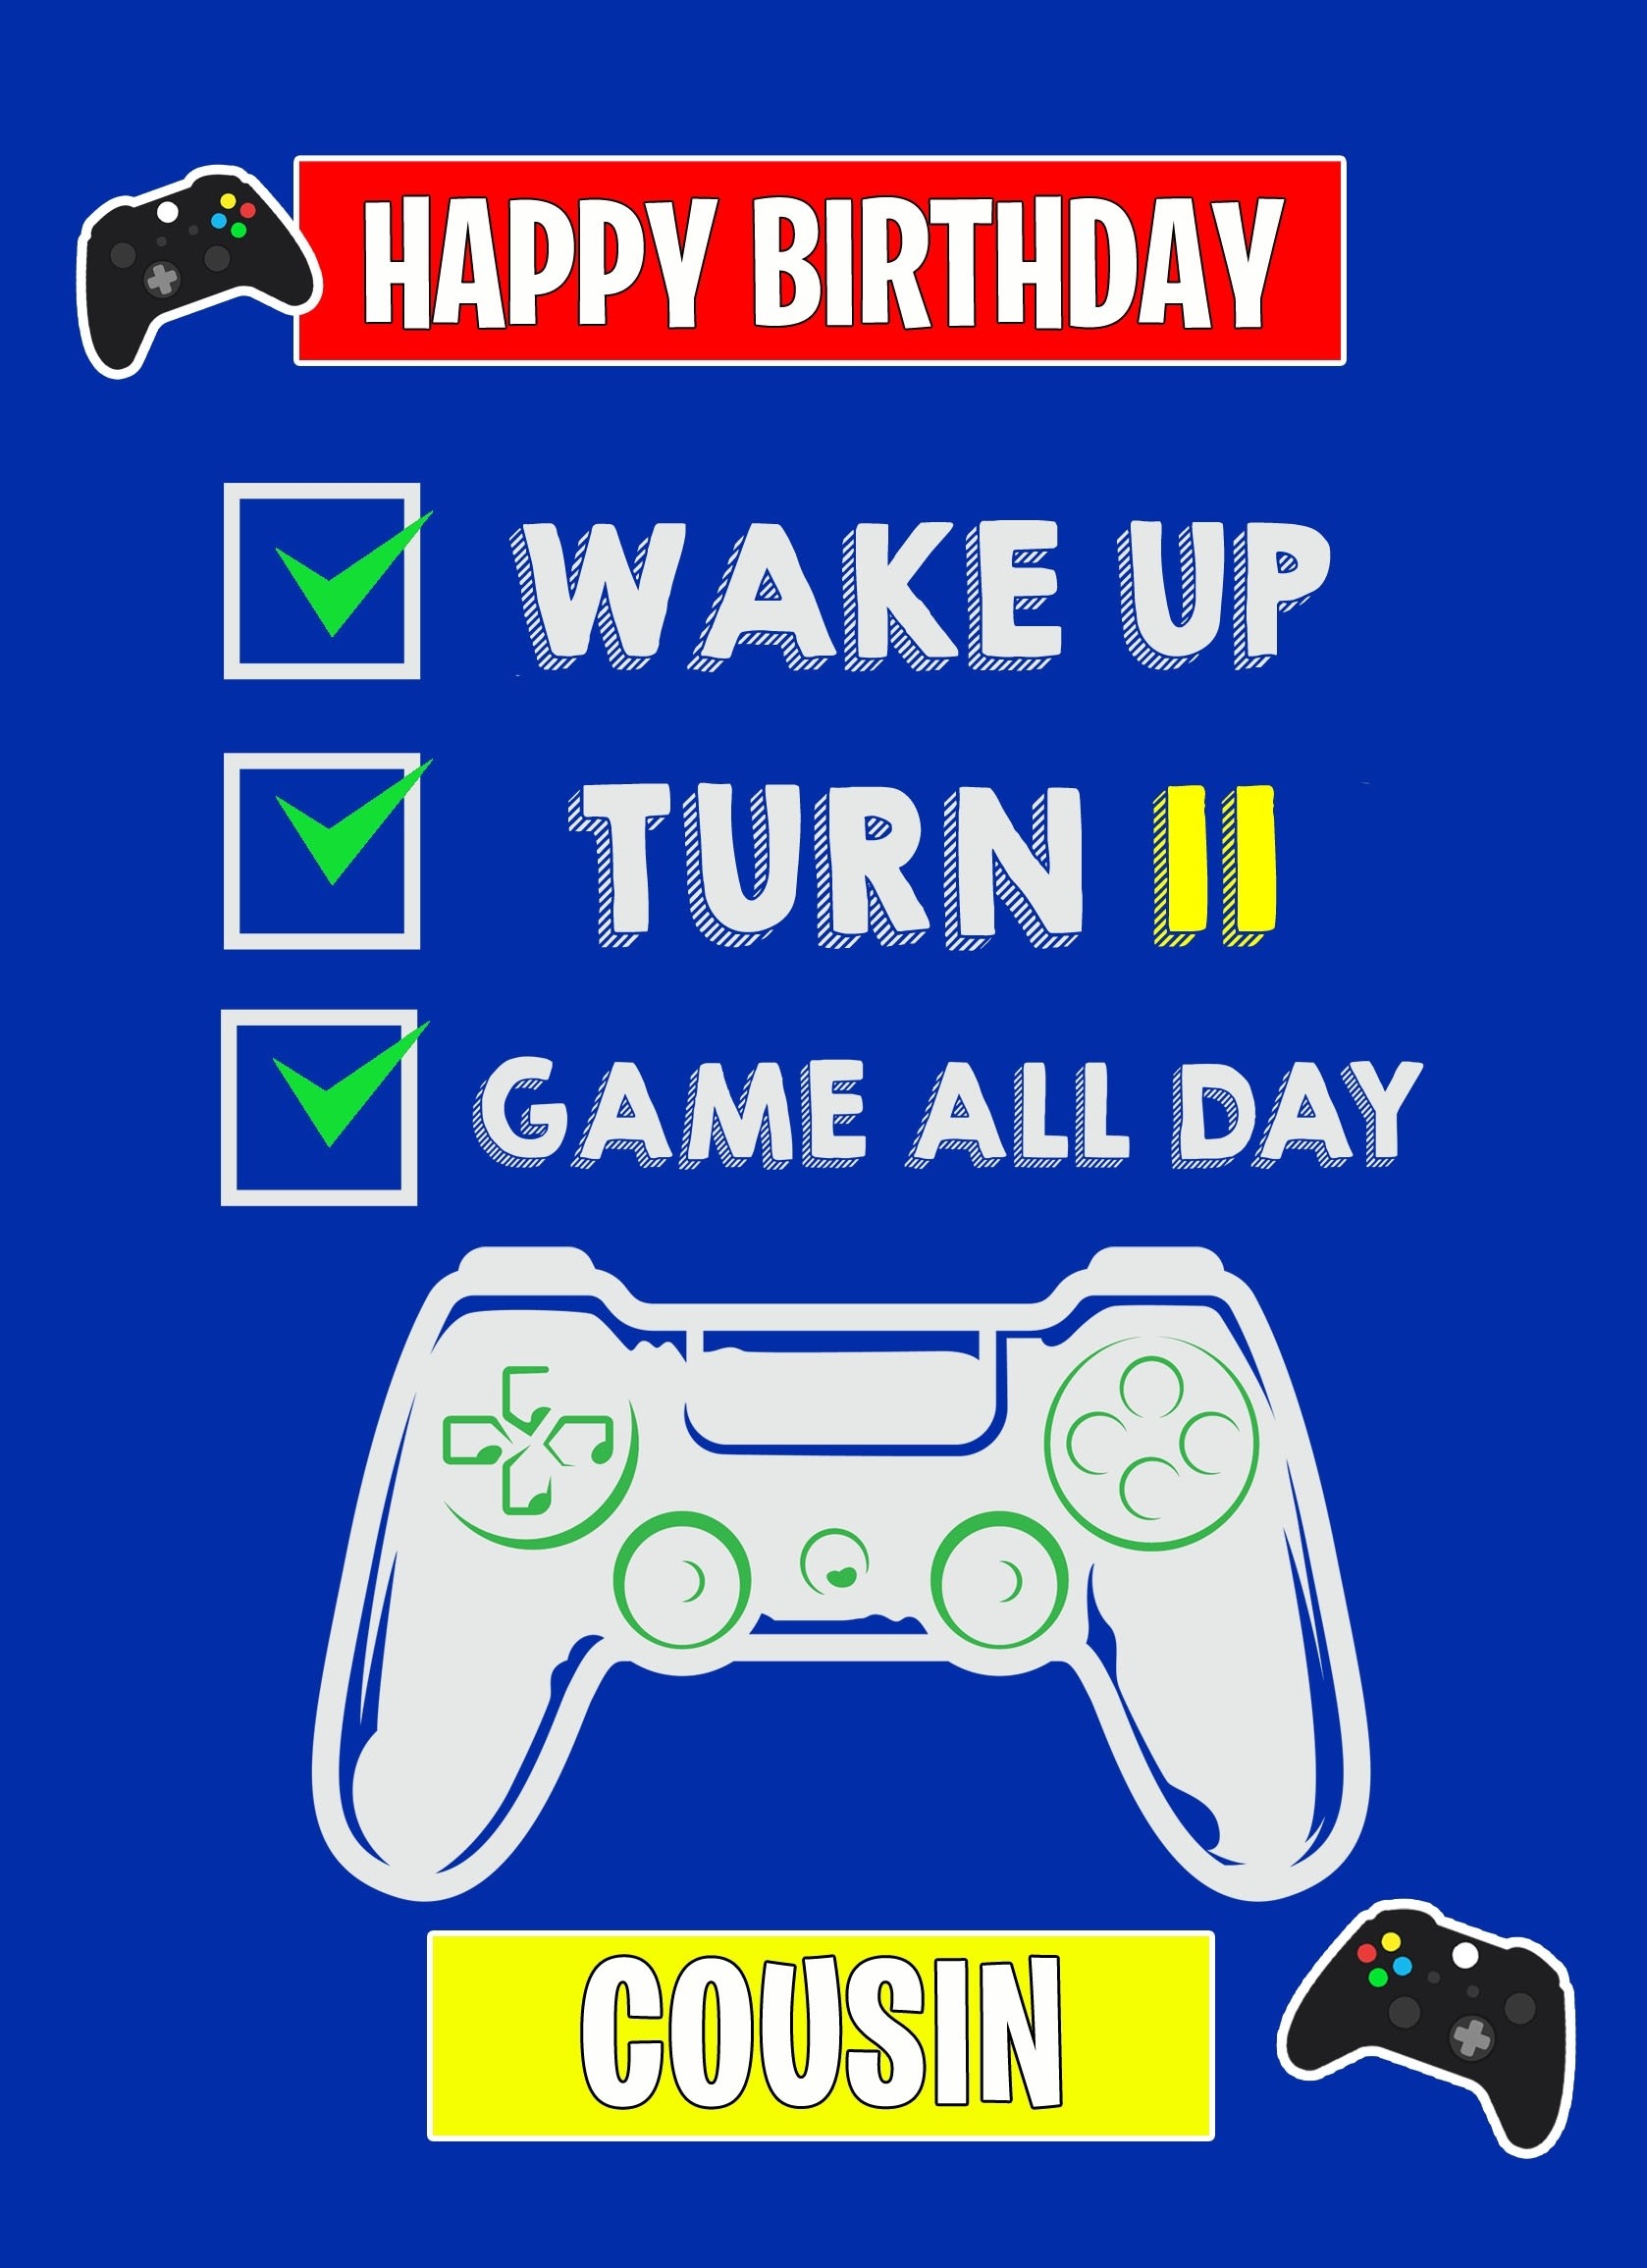 11th Level Gamer Birthday Card For Cousin